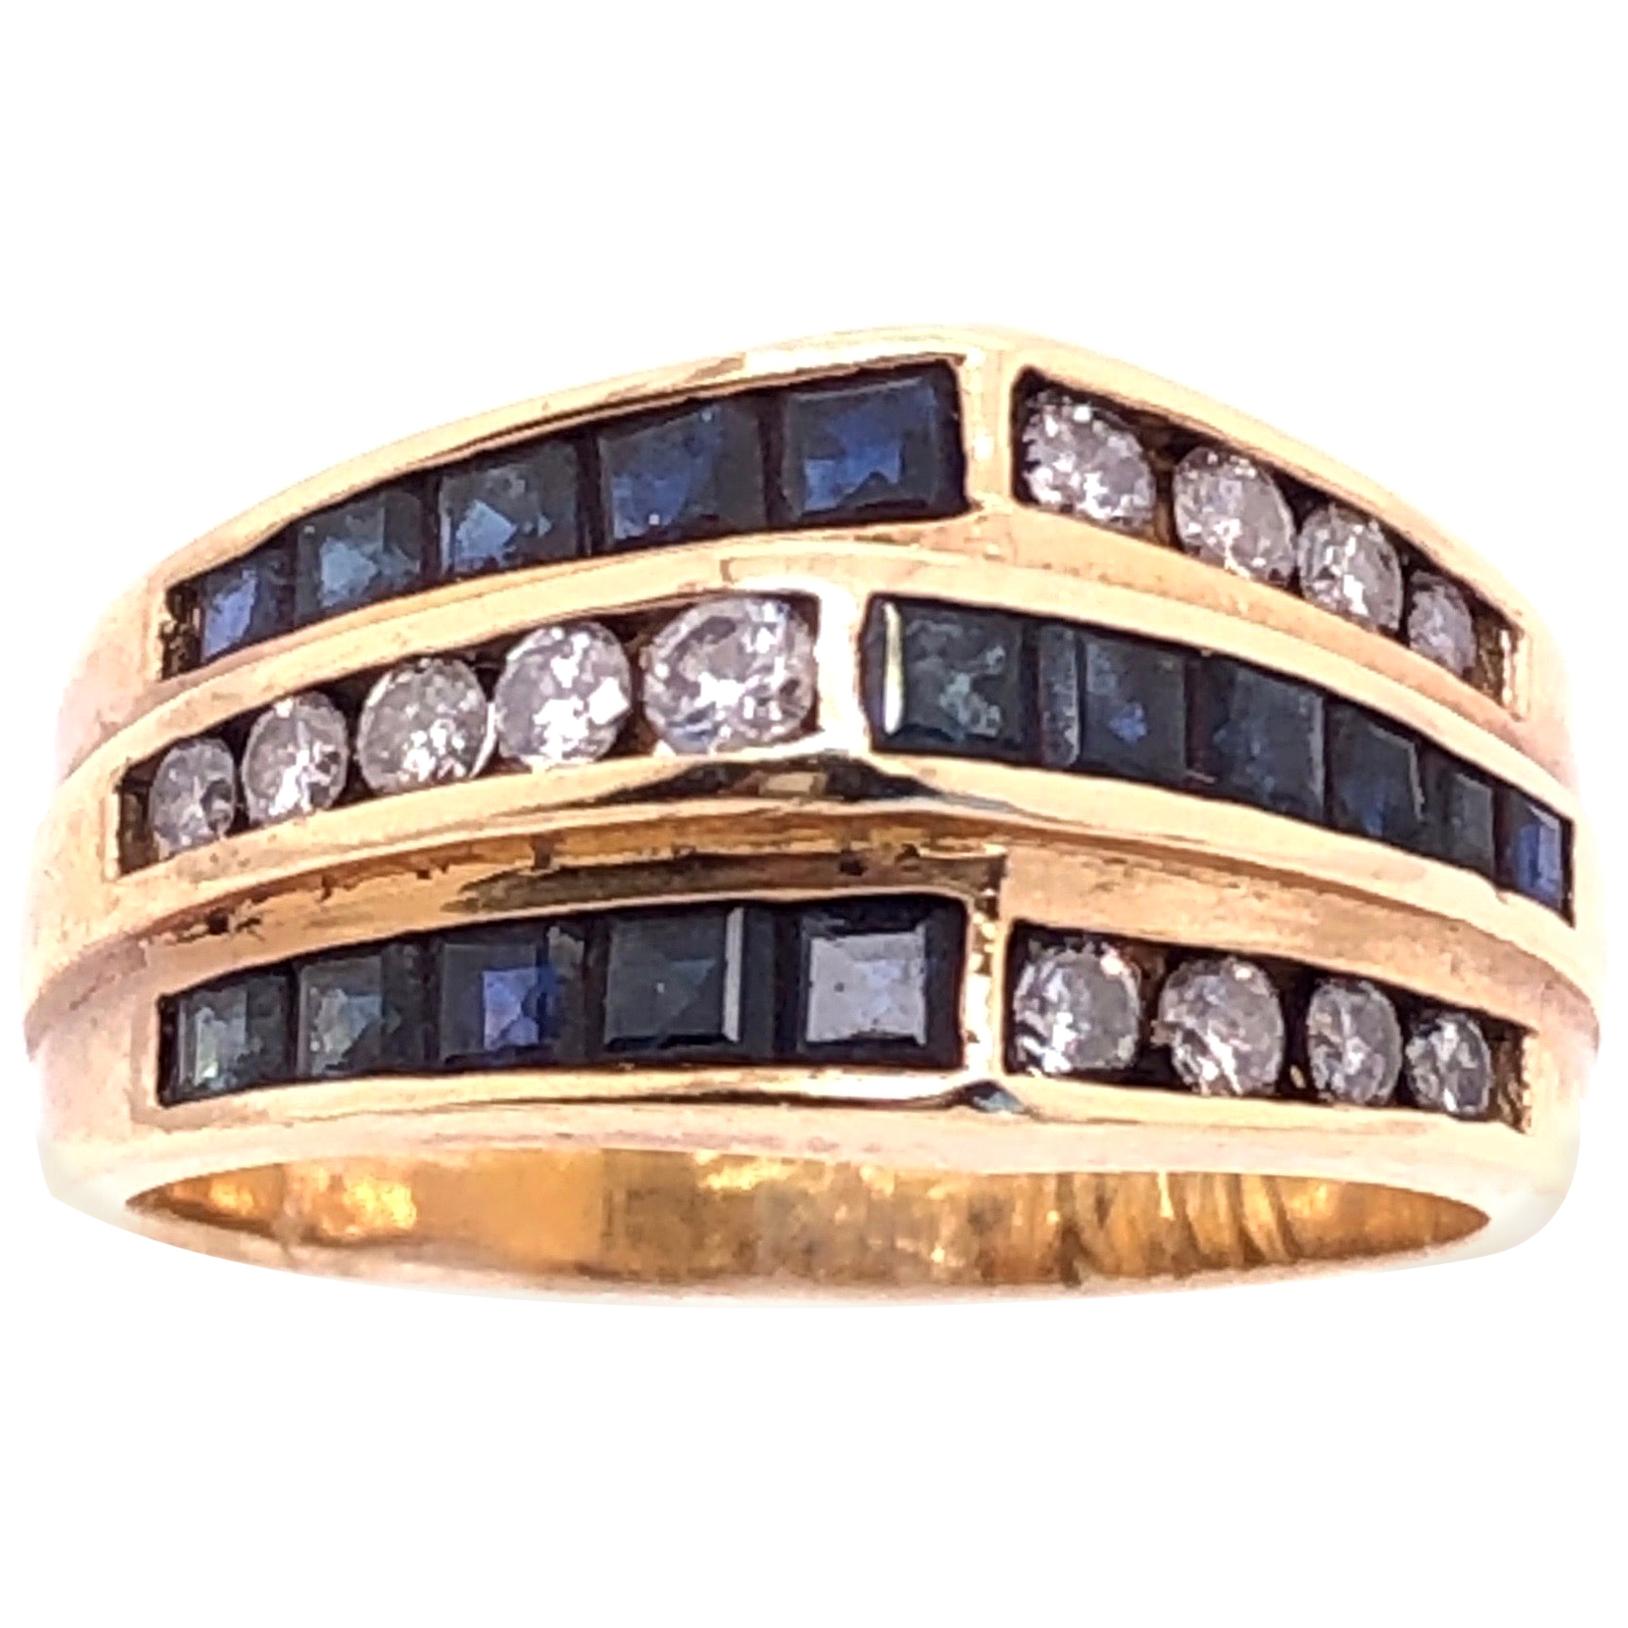 14 Karat Yellow Gold Three-Tier Ring with Sapphires and Diamonds